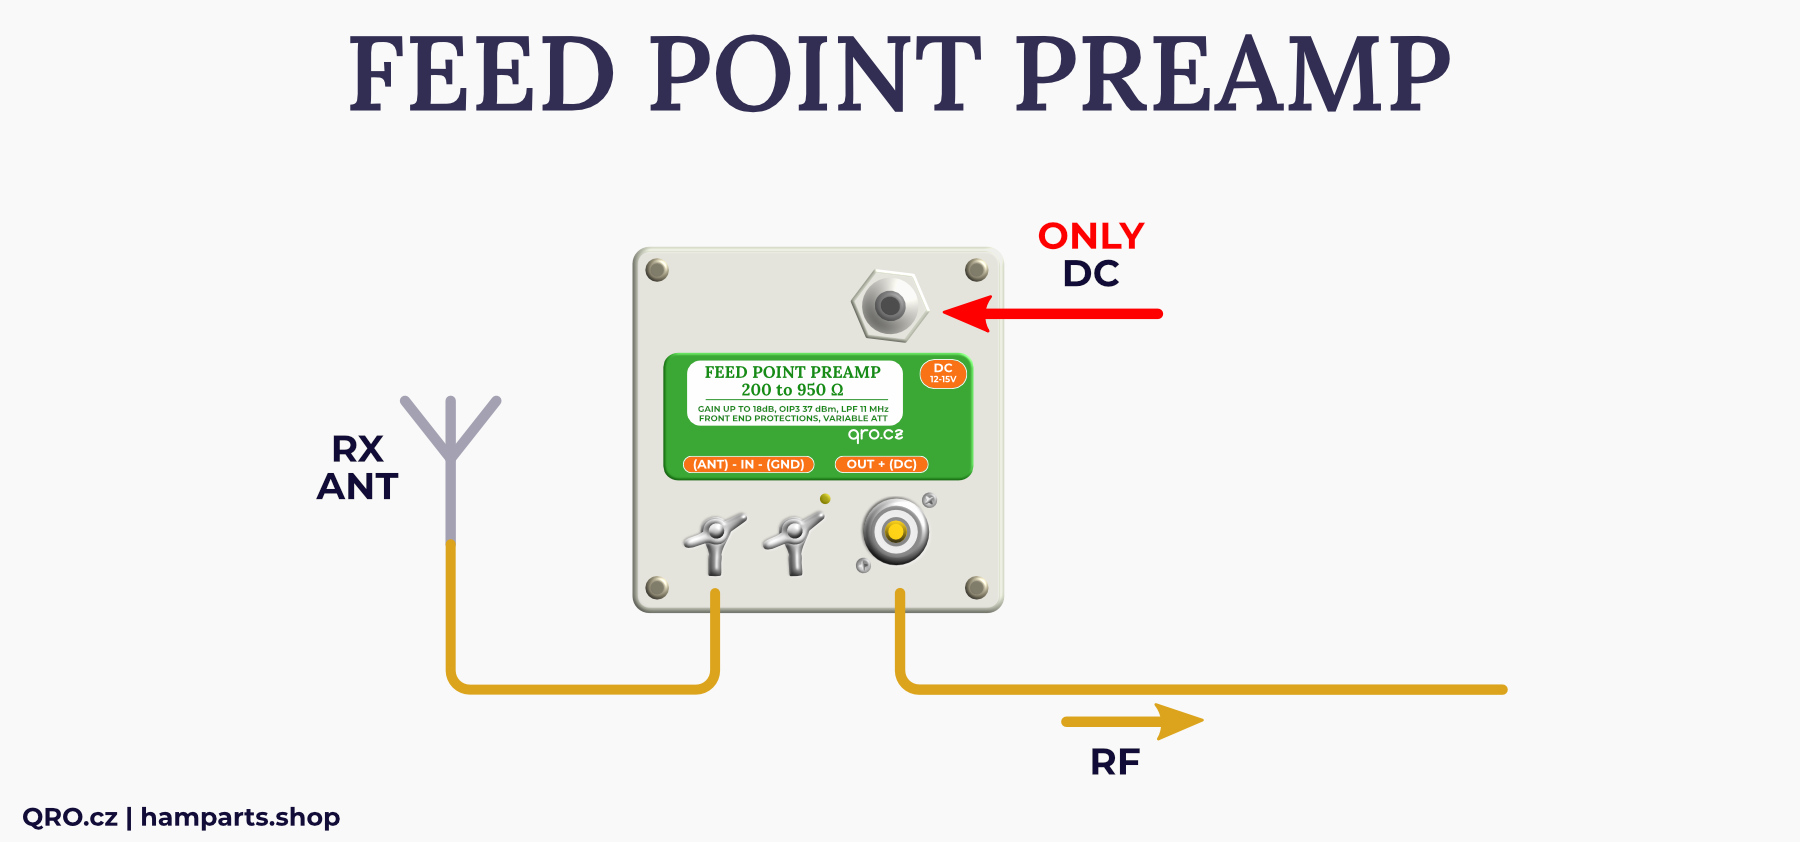 feed point preamp box pl so-239 connector connection directly through the cable gland by qro.cz hamparts.shop